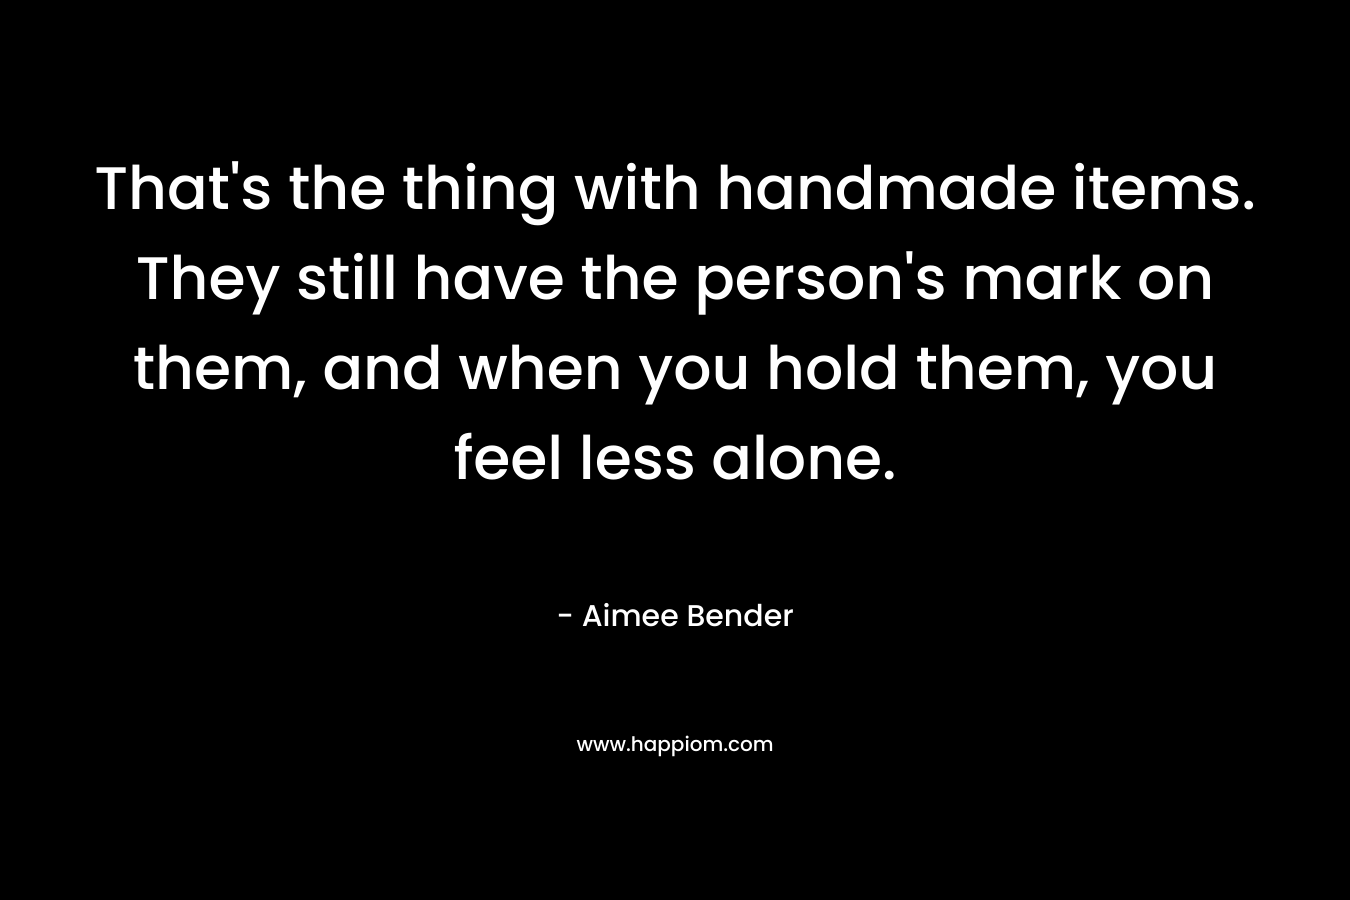 That's the thing with handmade items. They still have the person's mark on them, and when you hold them, you feel less alone.